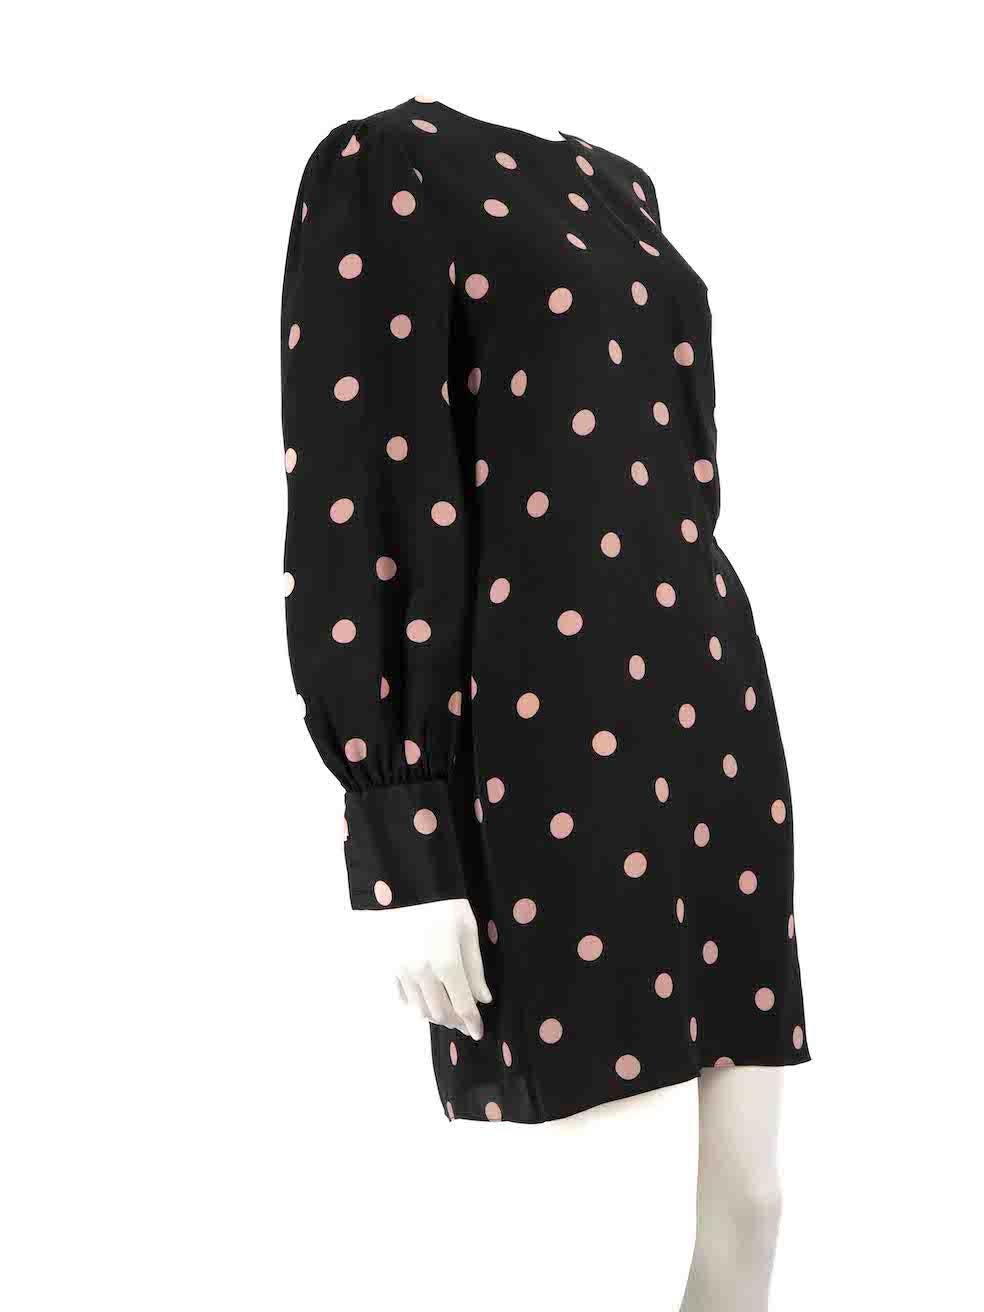 CONDITION is Very good. Hardly any visible wear to dress is evident on this used Zimmermann designer resale item.
 
 
 
 Details
 
 
 Black
 
 Silk
 
 Dress
 
 Pink polkadot pattern
 
 Long sleeves
 
 Buttoned cuffs
 
 Round neck
 
 Side ruched